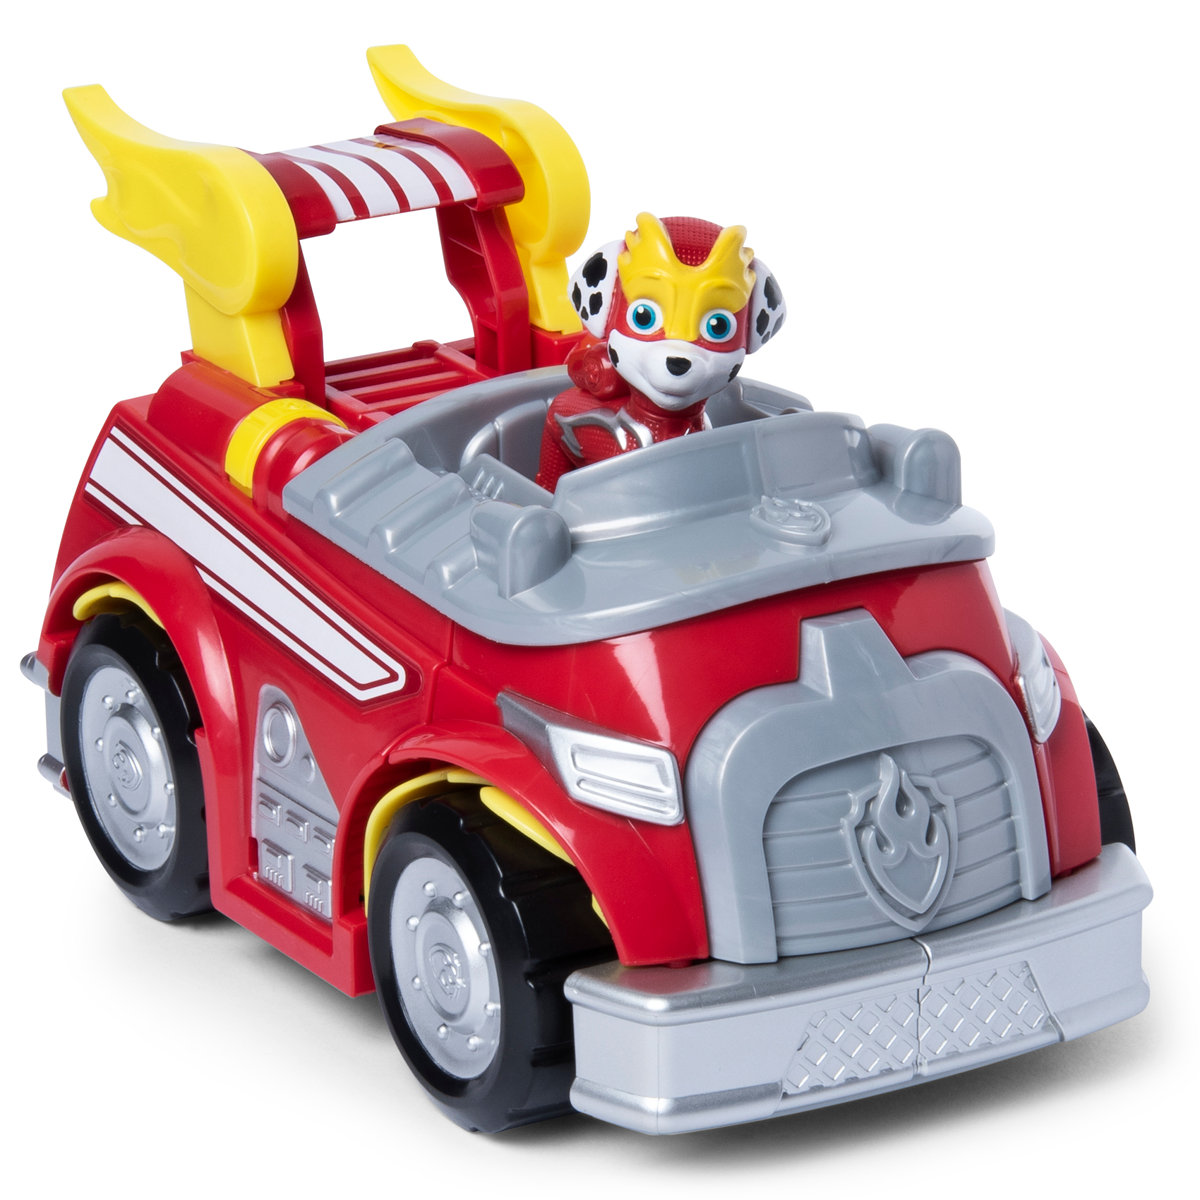 Nickelodeon Paw Patrol Marshalls Powered up Fire Truck Mighty Pups Super Paws for sale online 